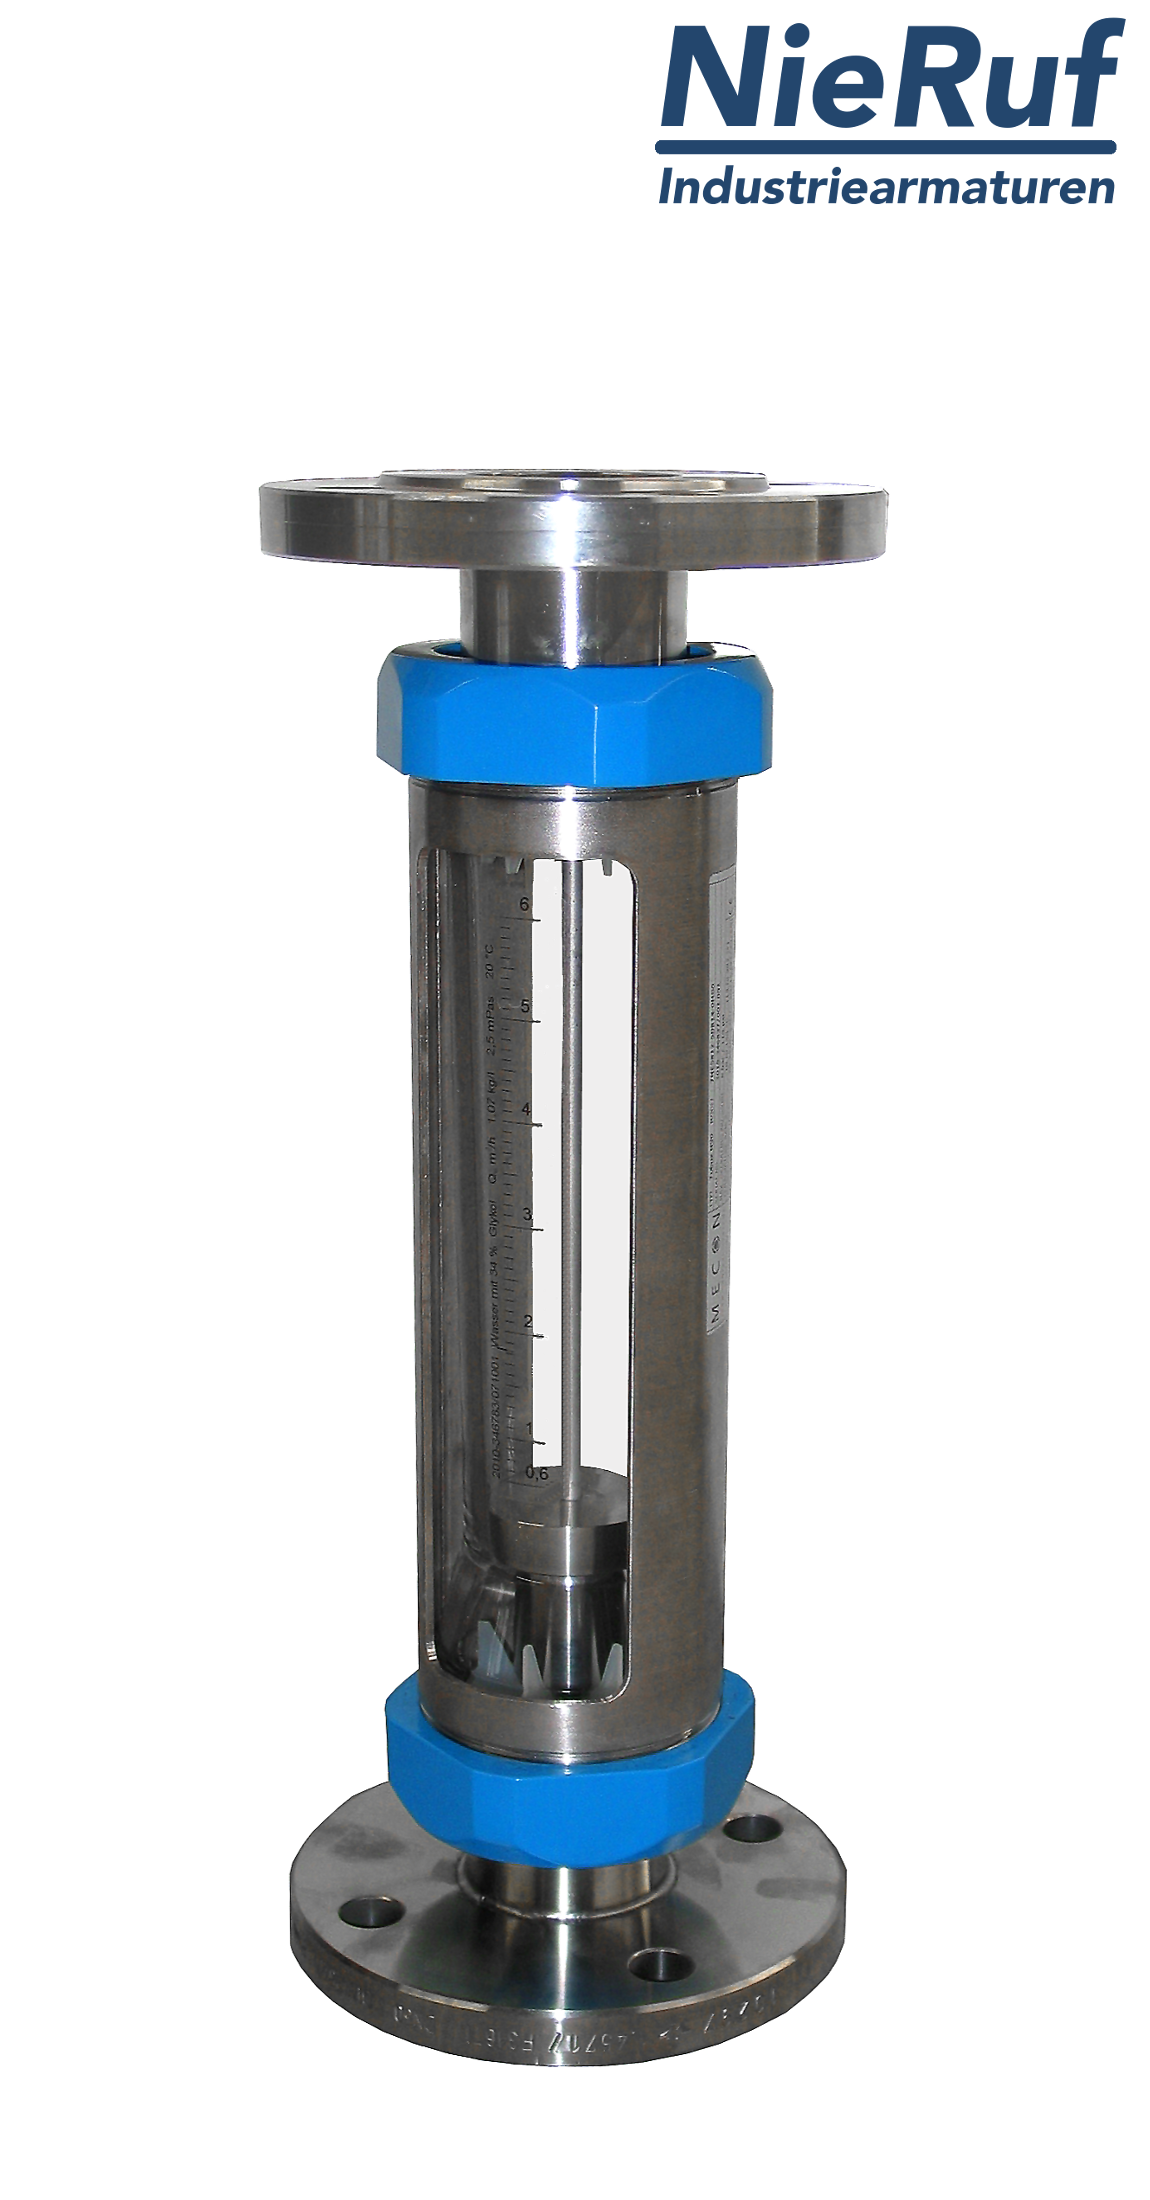 Variable area flowmeter stainless steel + borosilicate flange DN25 100.0 - 1000 l/h water FKM